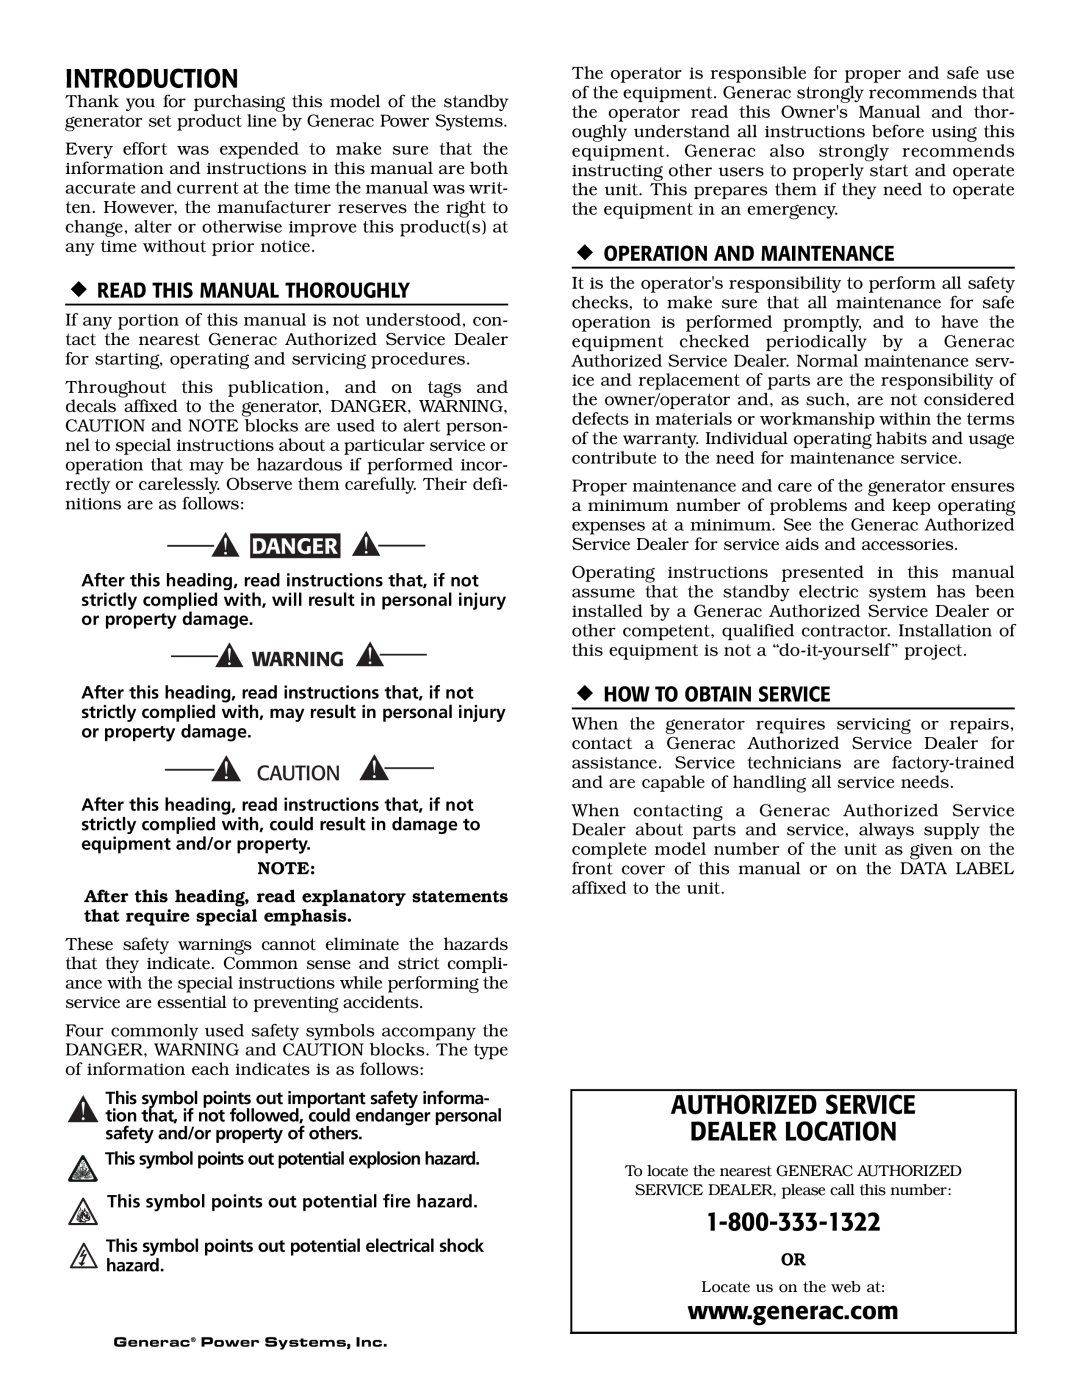 Generac Power Systems 004988-1 Introduction, Authorized Service Dealer Location, ‹Read This Manual Thoroughly, Danger 